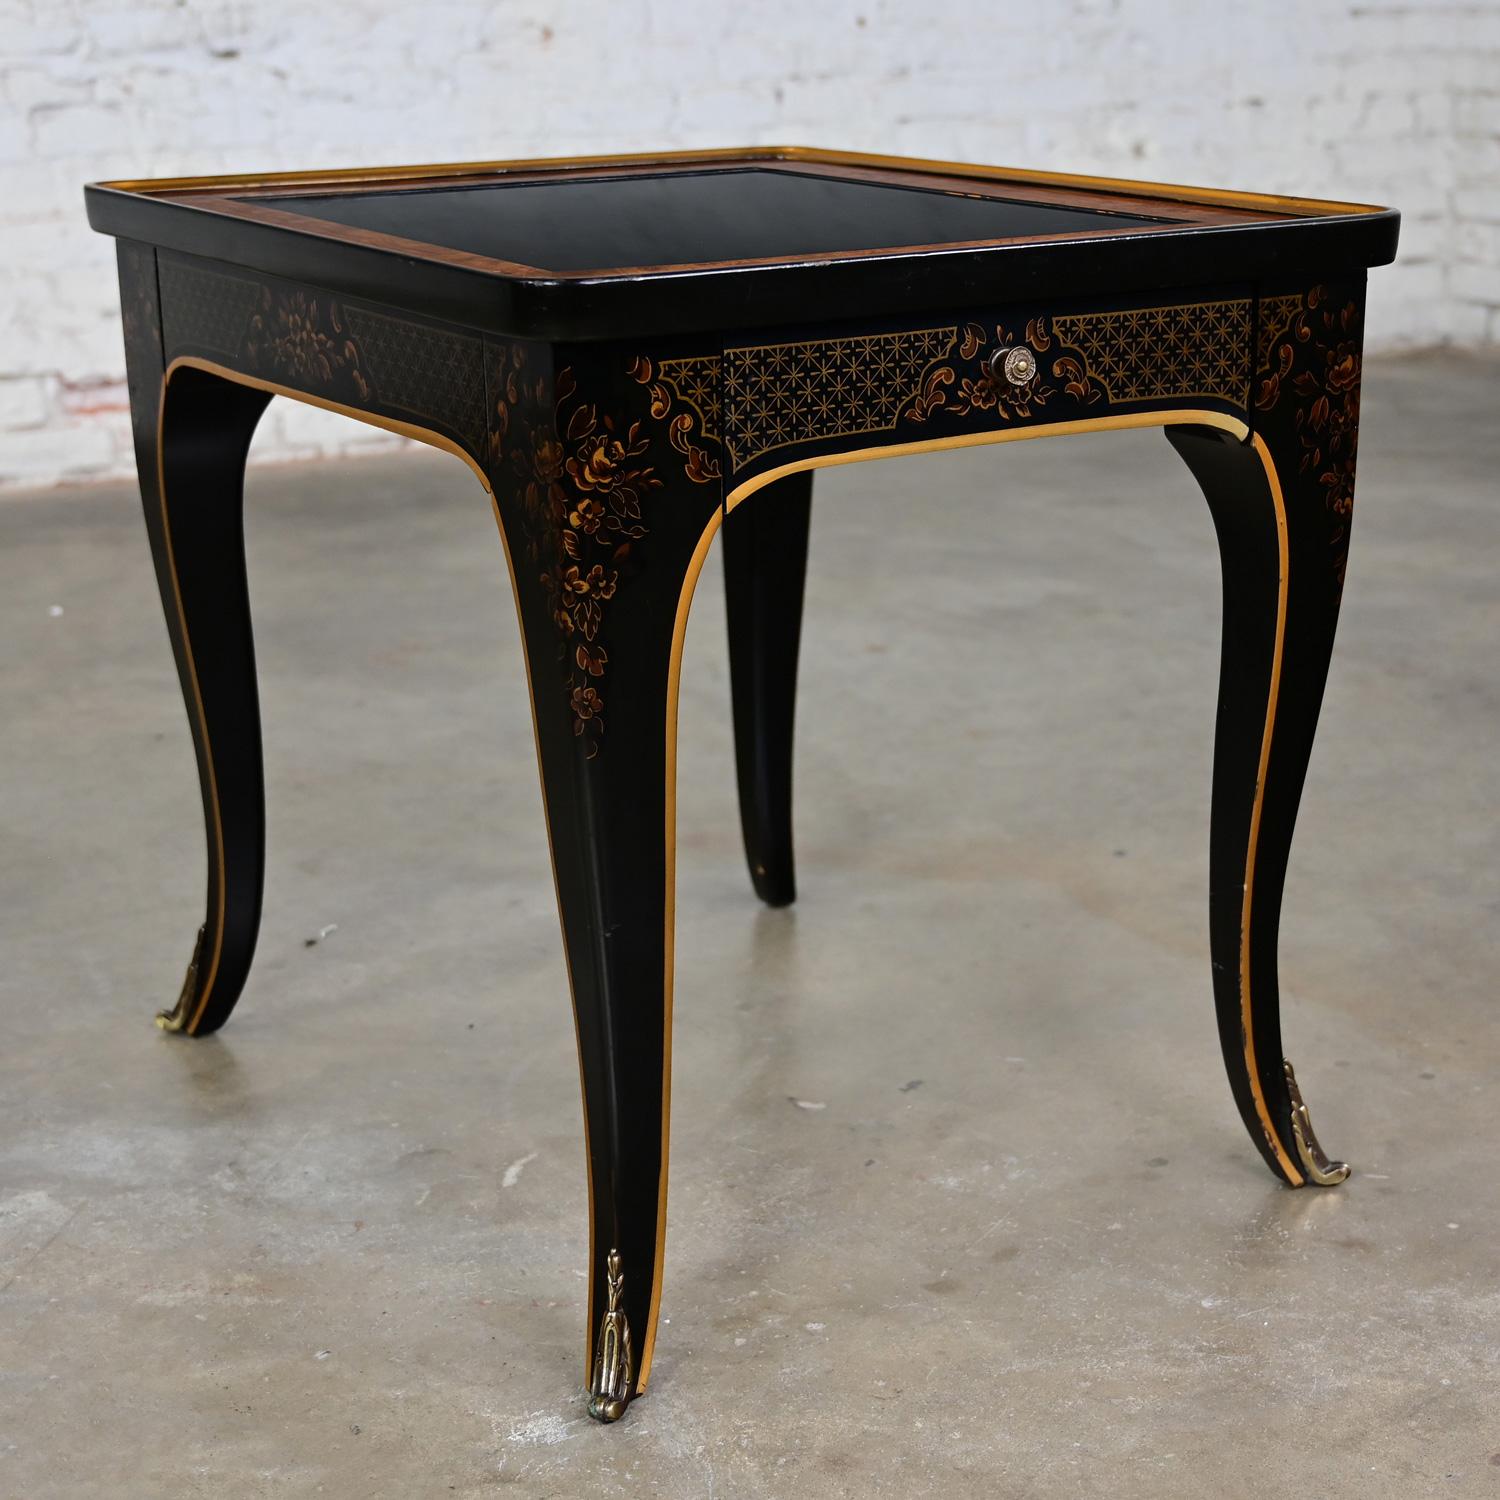 1982 Drexel Heritage ET Cetera Chinoiserie End Table Black & Burl with Ormolu For Sale 11